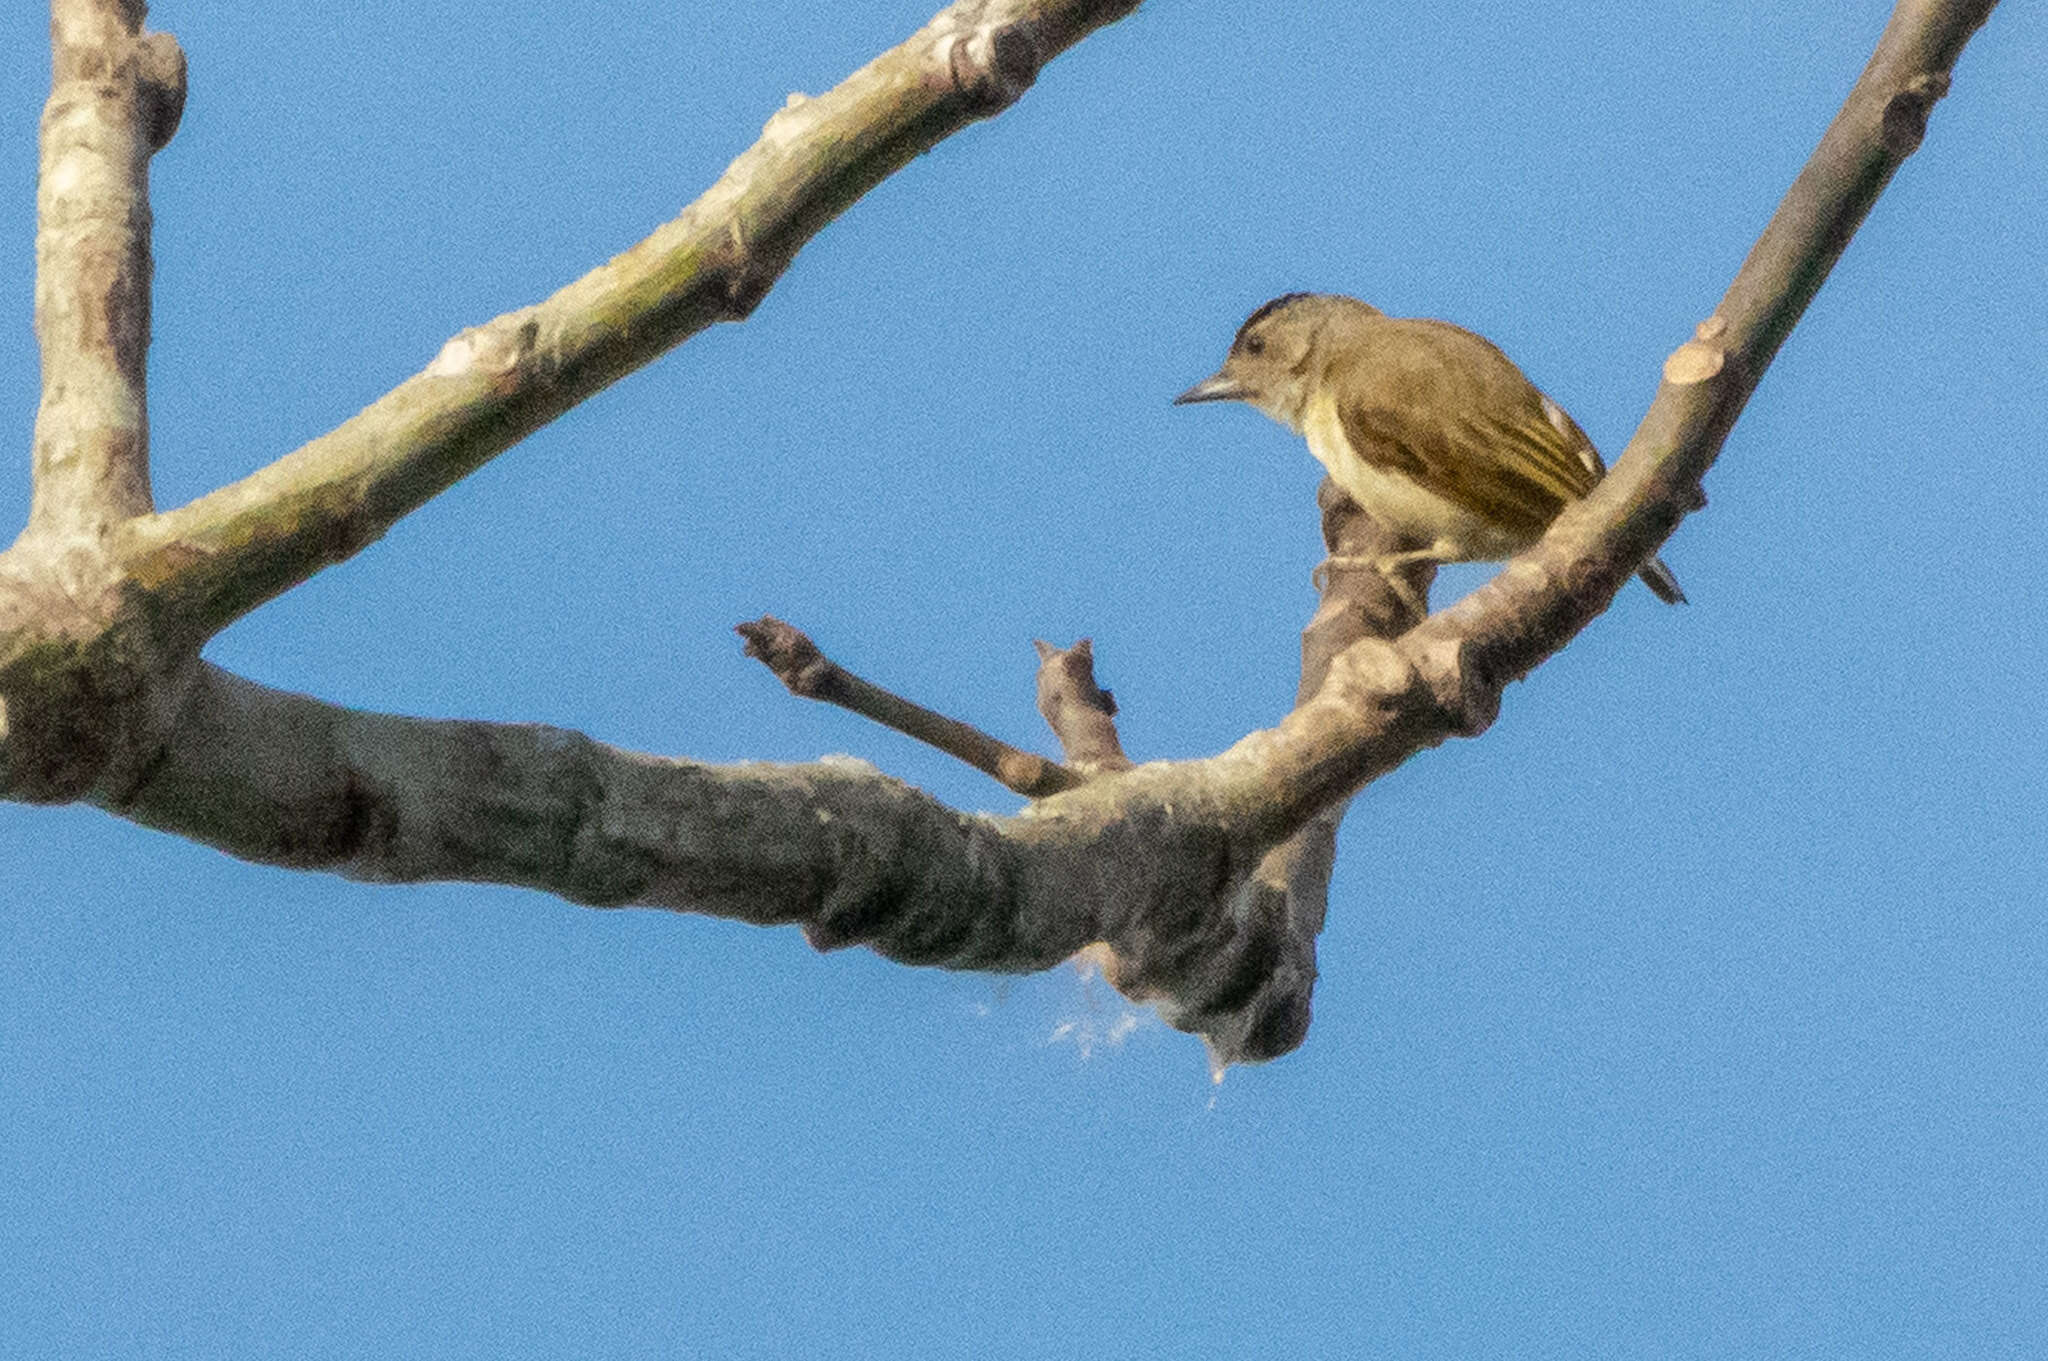 Image of Plain-breasted Piculet